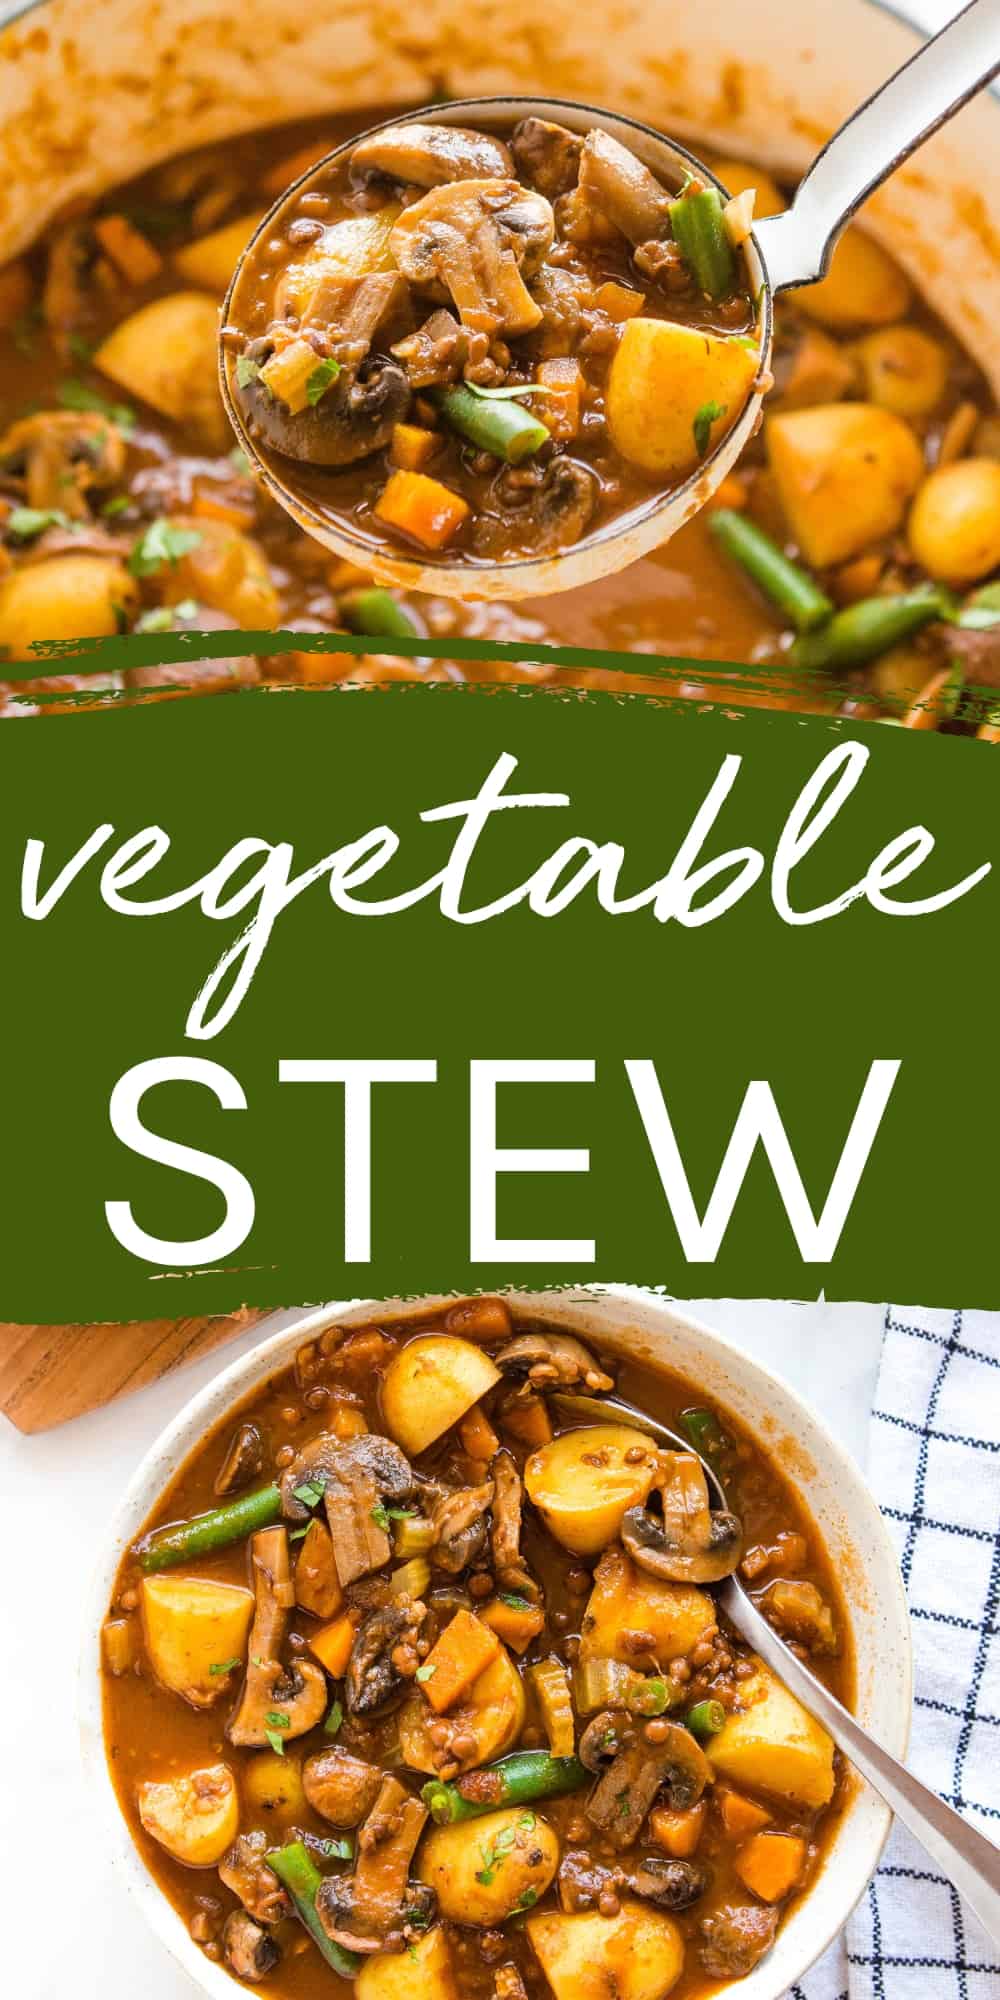 This Vegetable Stew is hearty and delicious, and packed with healthy veggies and lentils! A super filling vegetarian comfort food meal that's ready in under an hour! Recipe from thebusybaker.ca! #vegetablestew #vegetarianstew #vegetarianmeal #soup #stew #healthycomfortfood #comfortfood #healthy #plantbased #vegan #easytomake via @busybakerblog